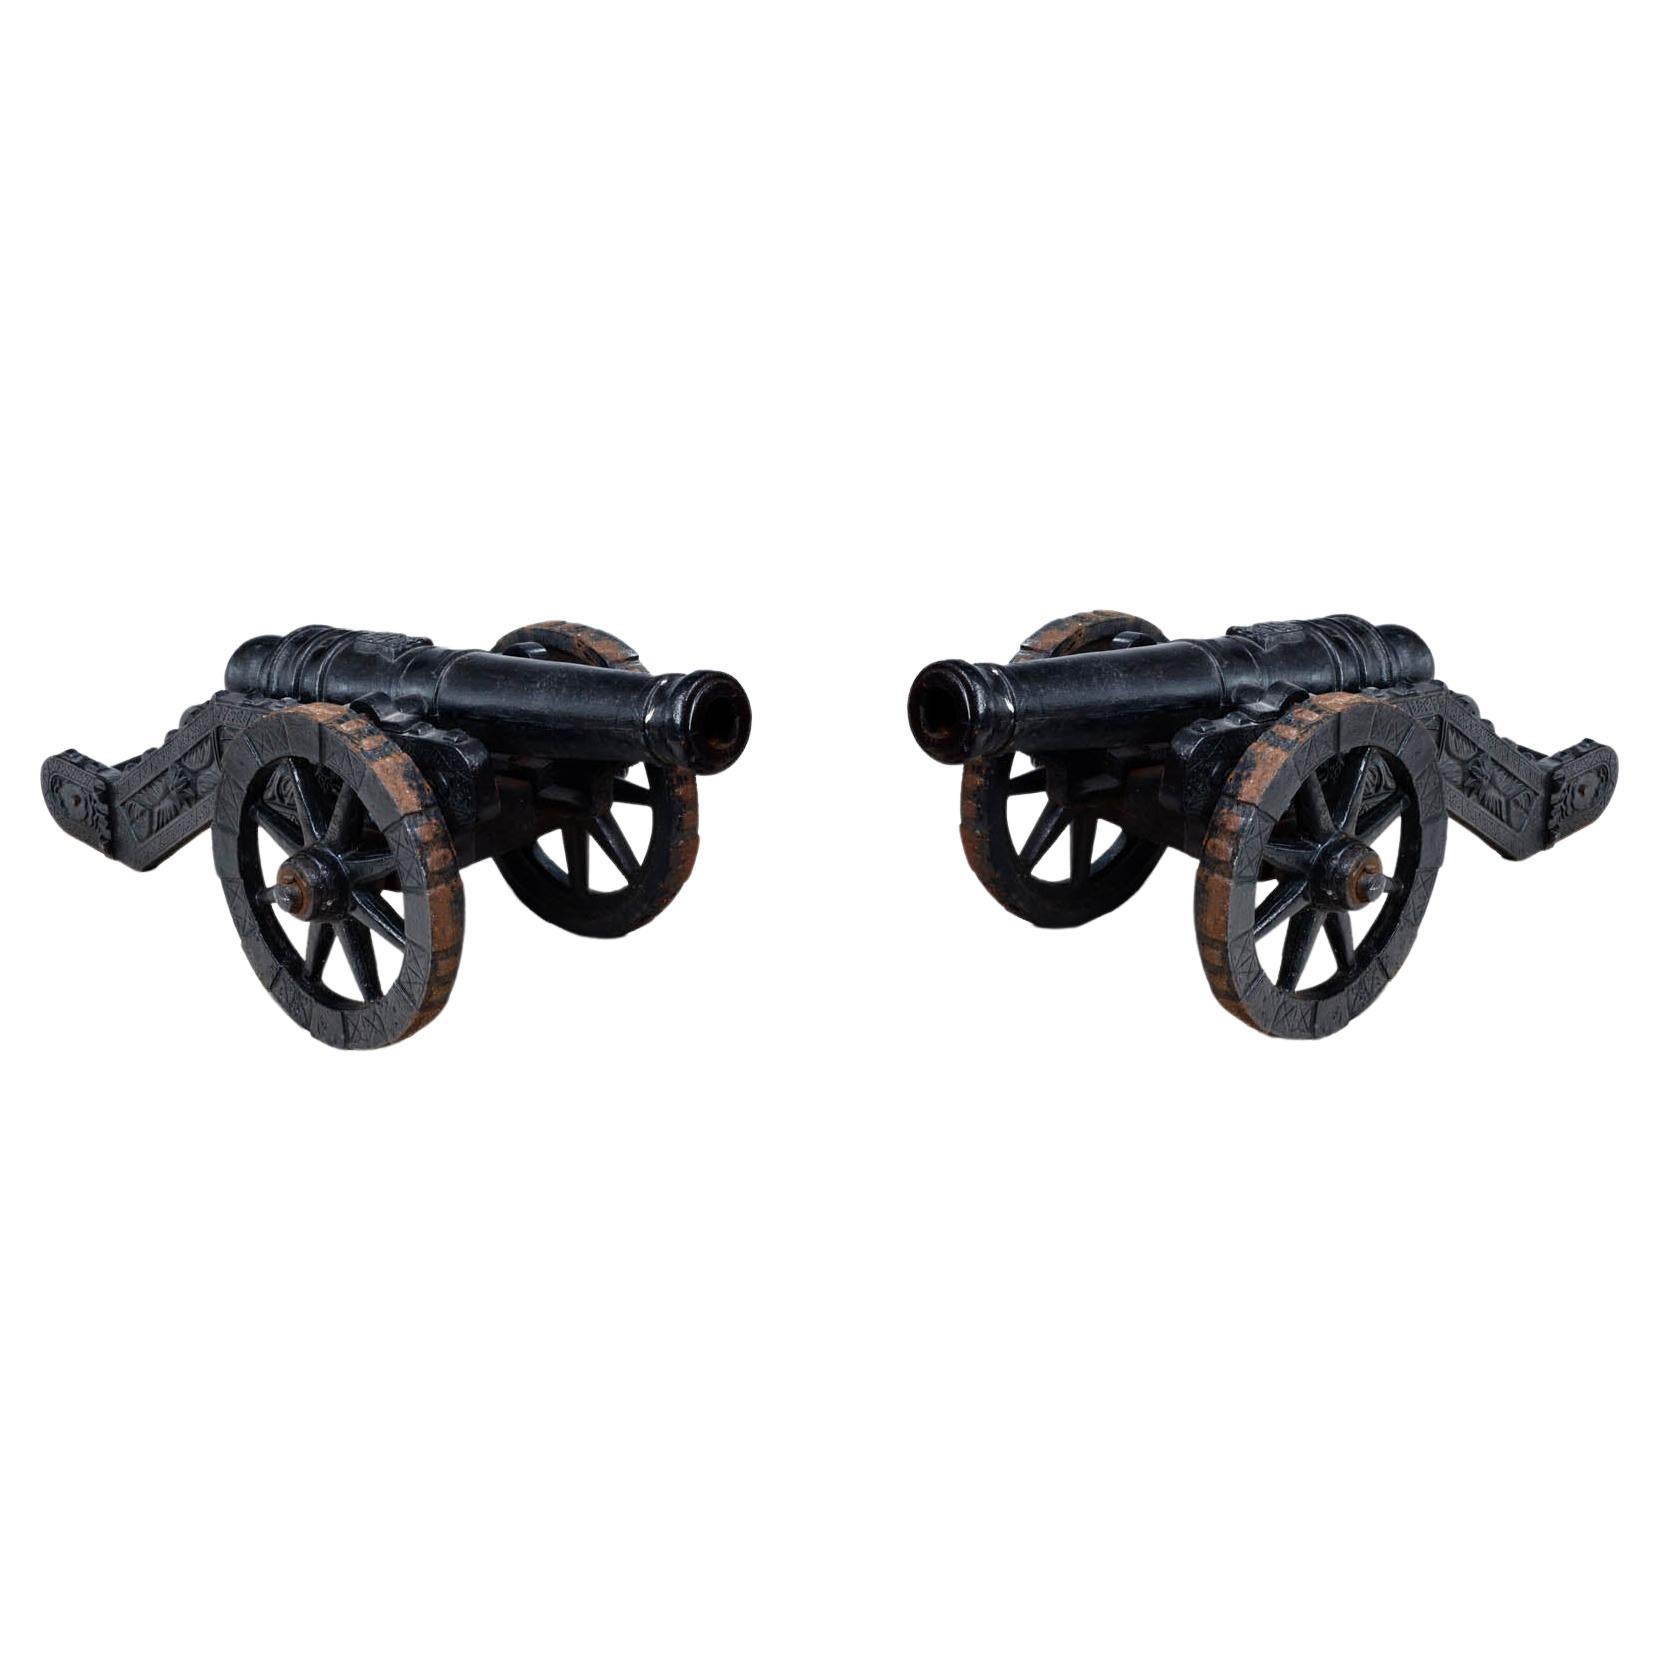 Late 19th Century Pair Decorative Cast Iron Signaling Cannons